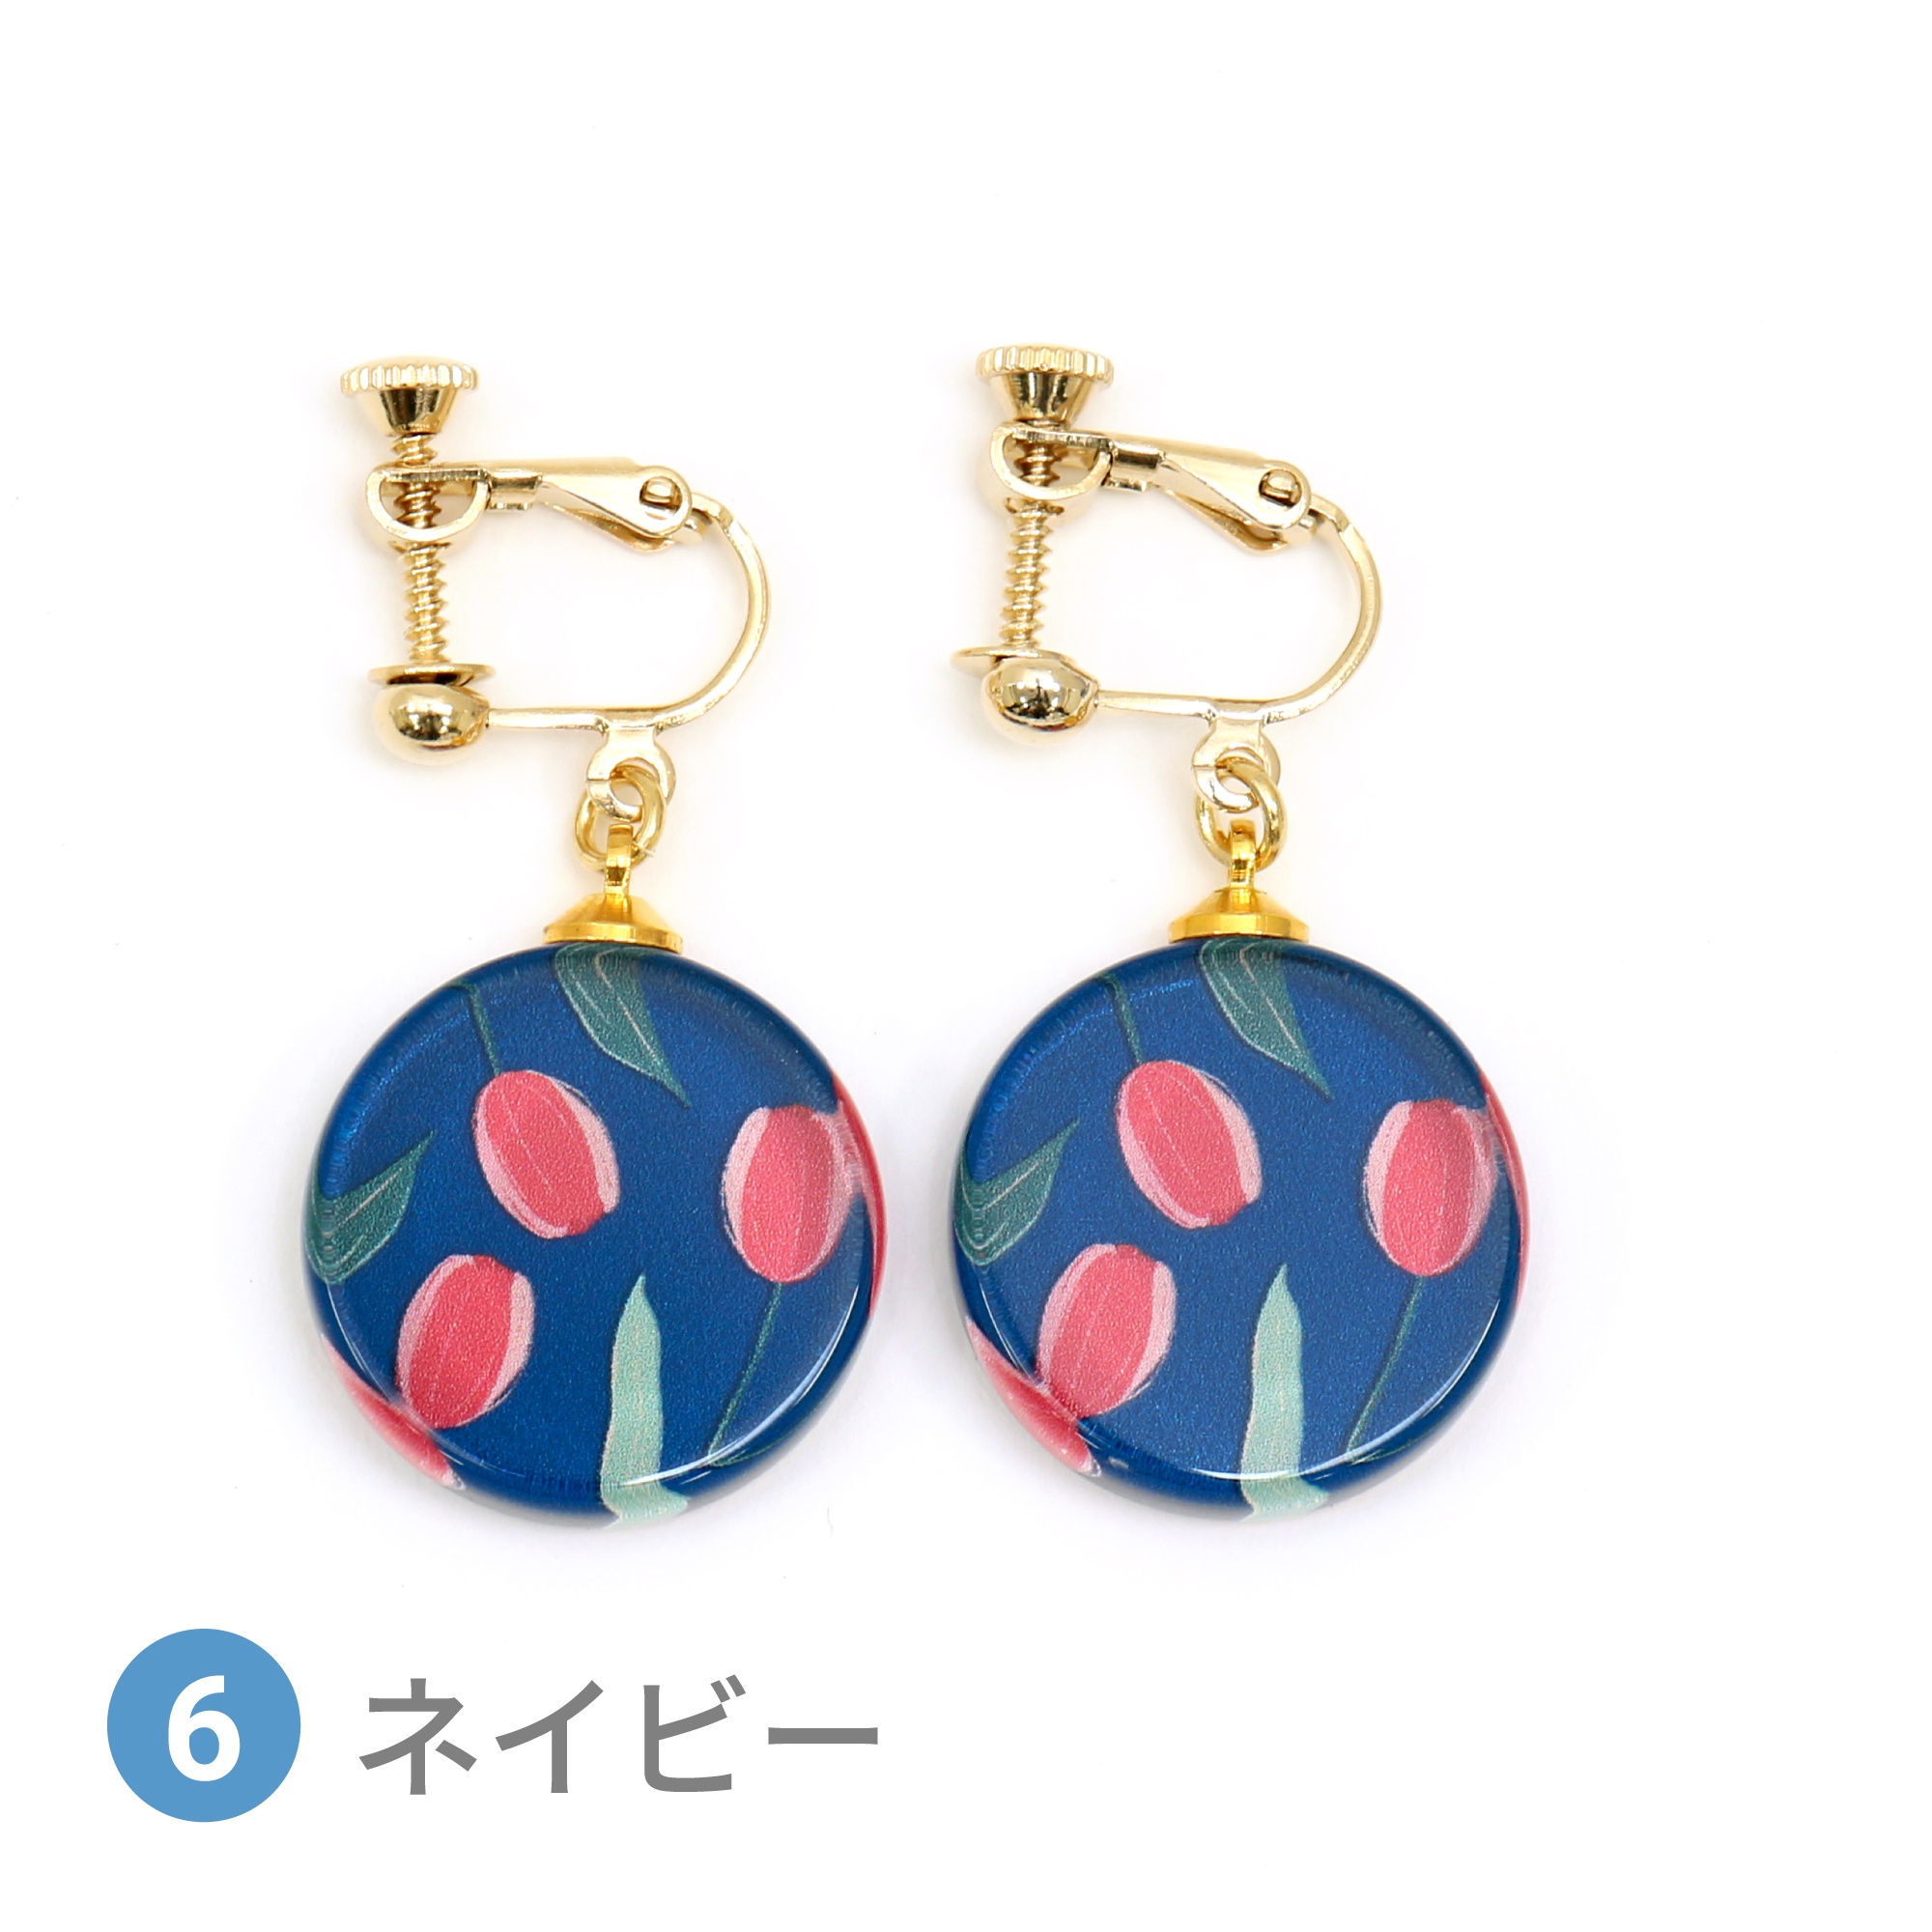 Glass accessories Earring TULIP navy round shape